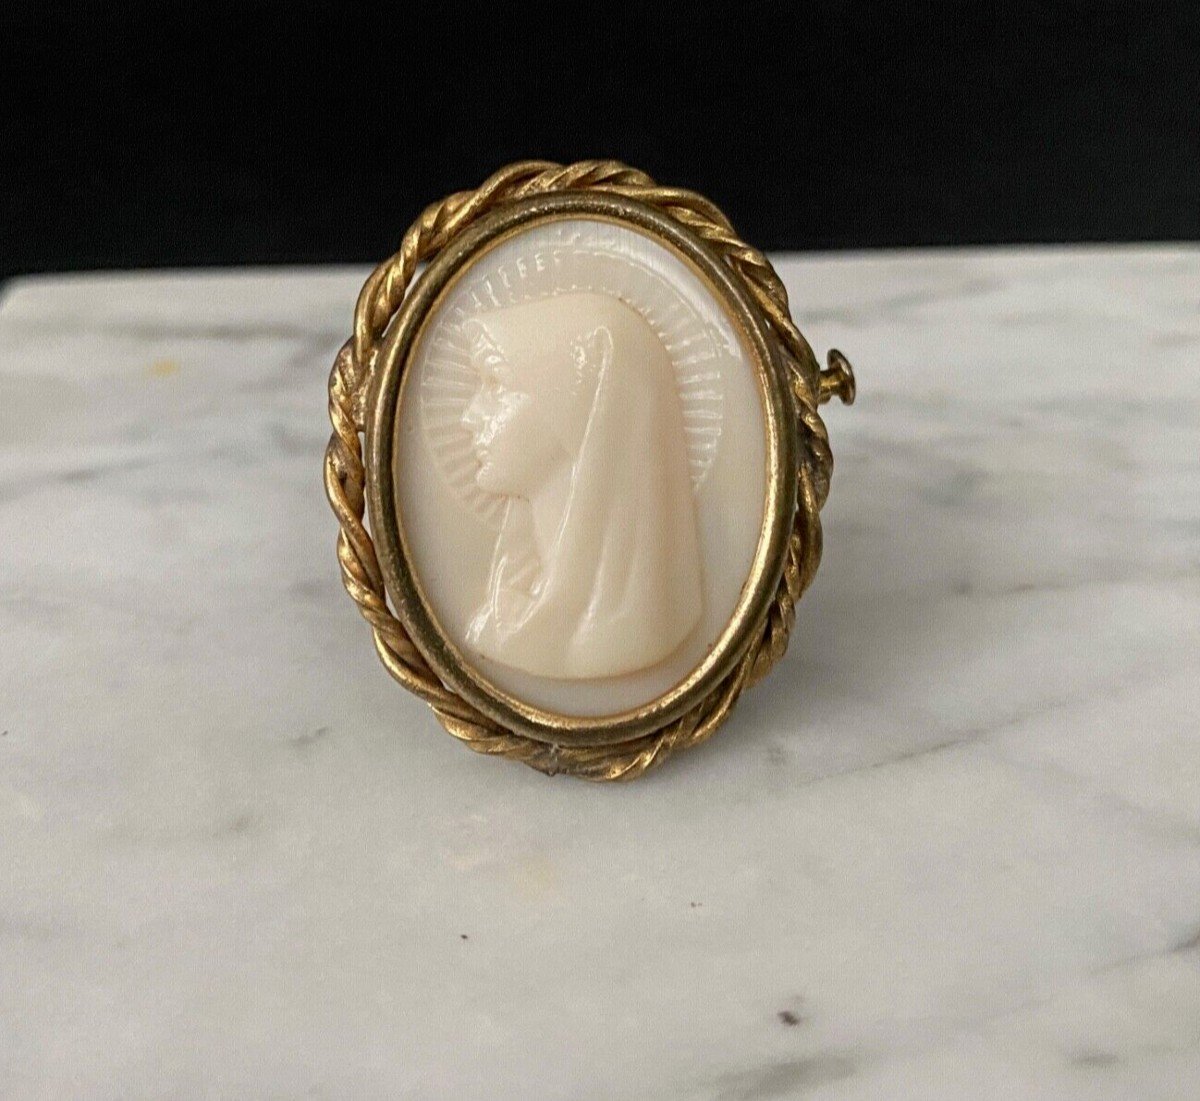 Cameo With Religious Decoration Representing A Virgin On A Brooch, Early 20th Century